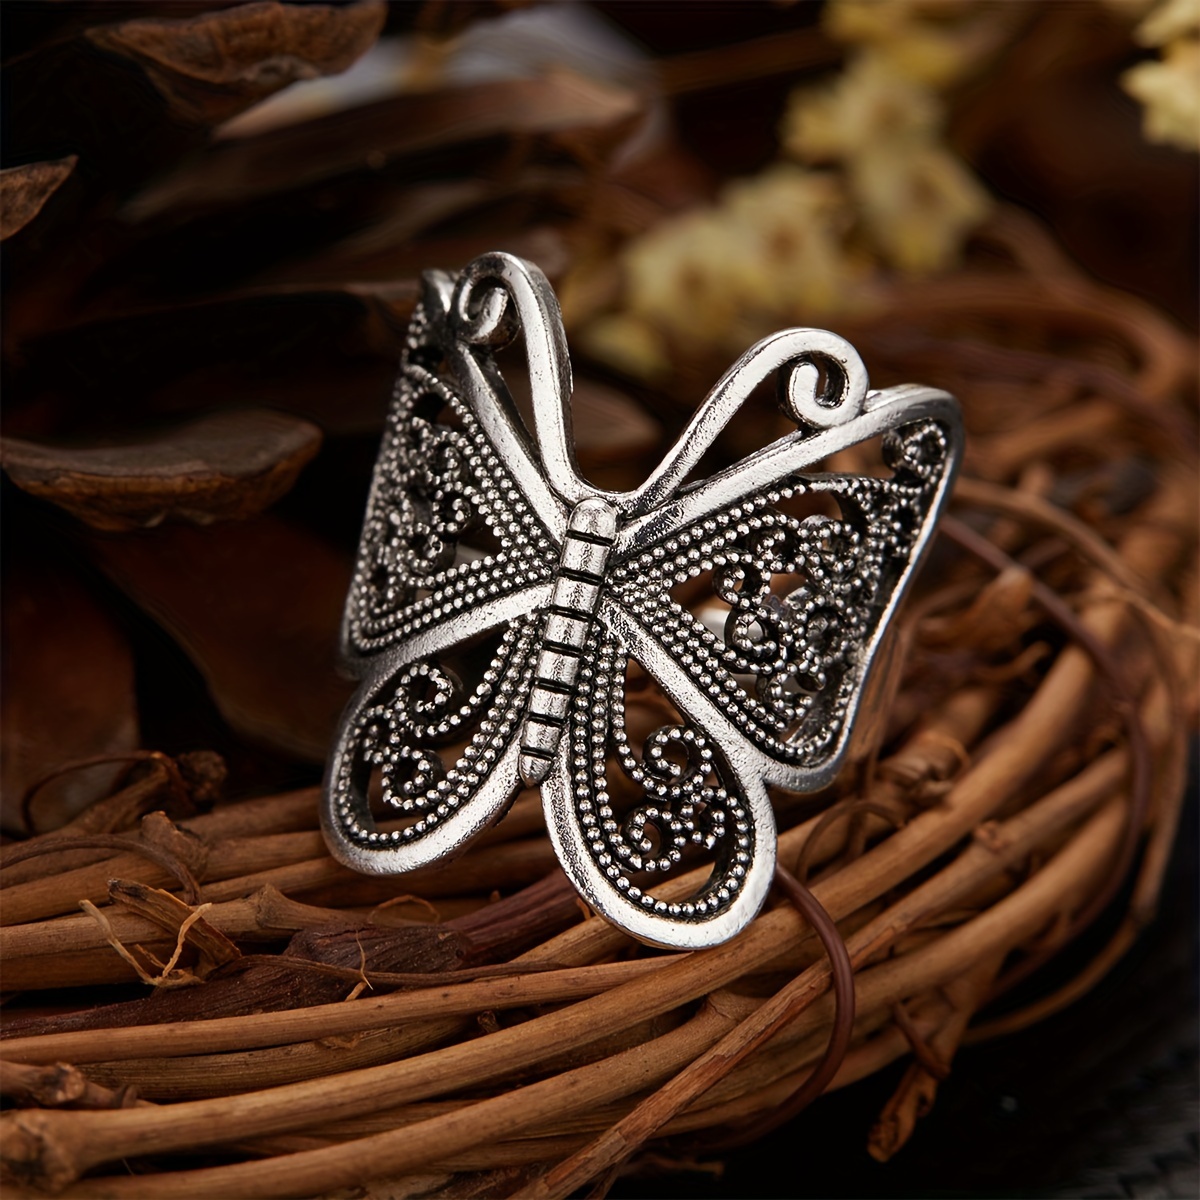 

Vintage Ring Hollow Butterfly Design Detailed Carving Craft Match Daily Outfits Adjustable Jewelry Symbol Of Beauty And Freedom